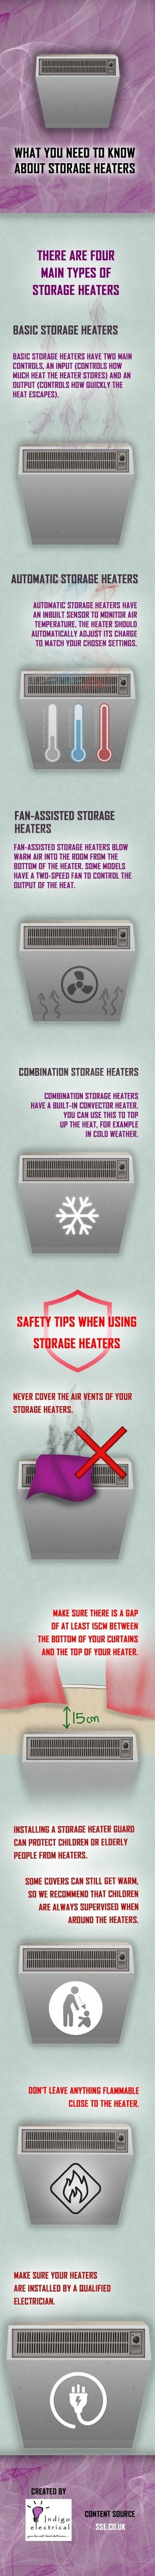 What you need to know about storage heaters